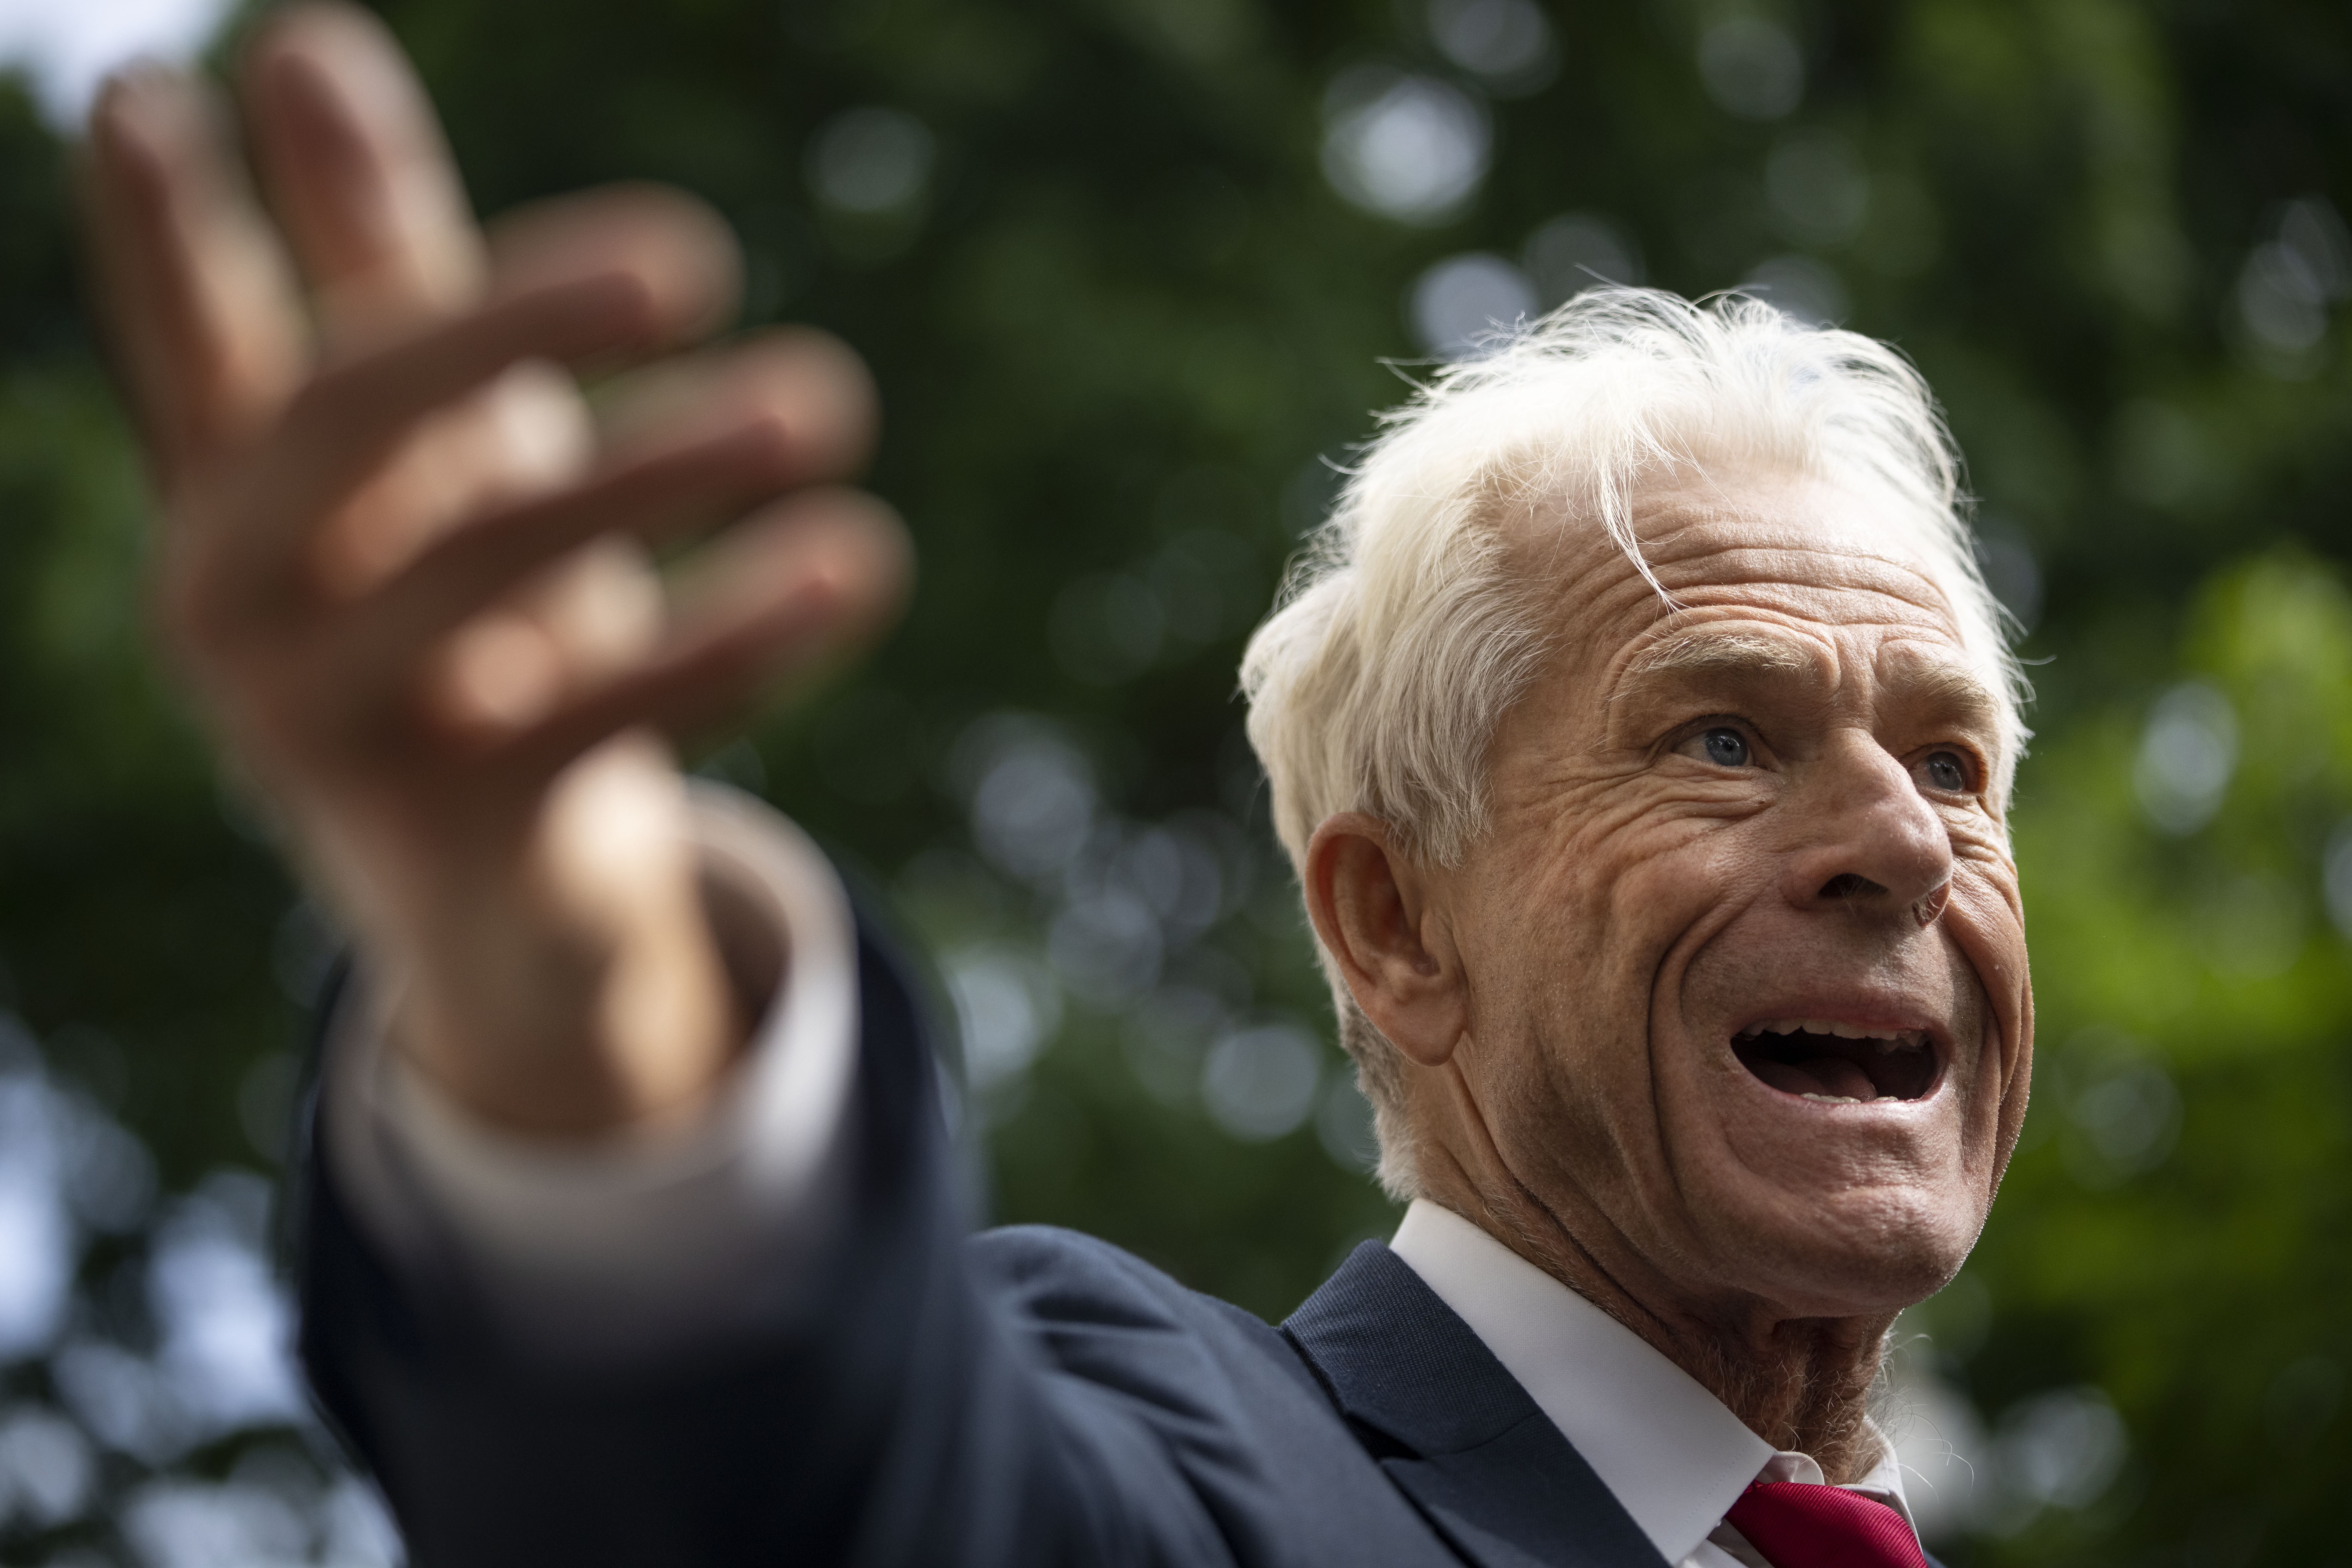 Former Trump White House Advisor Peter Navarro talks to the media as he leaves federal court on June 3, 2022 in Washington, DC. (Drew Angerer/Getty Images)